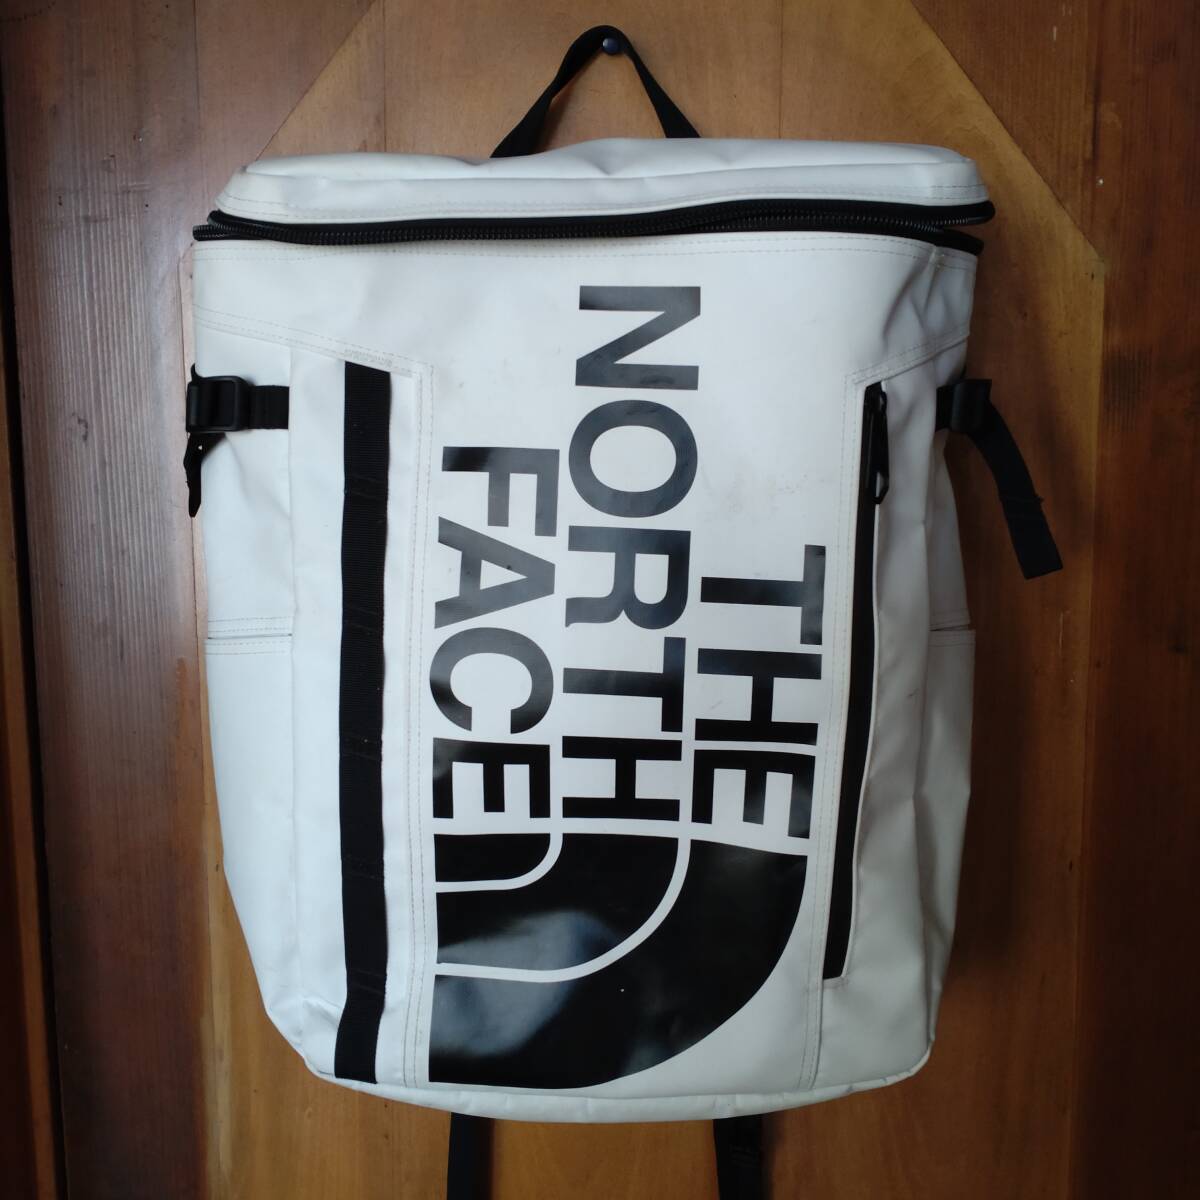 * THE NORTH FACE fuse BOX North Face fuse box rucksack white USED*